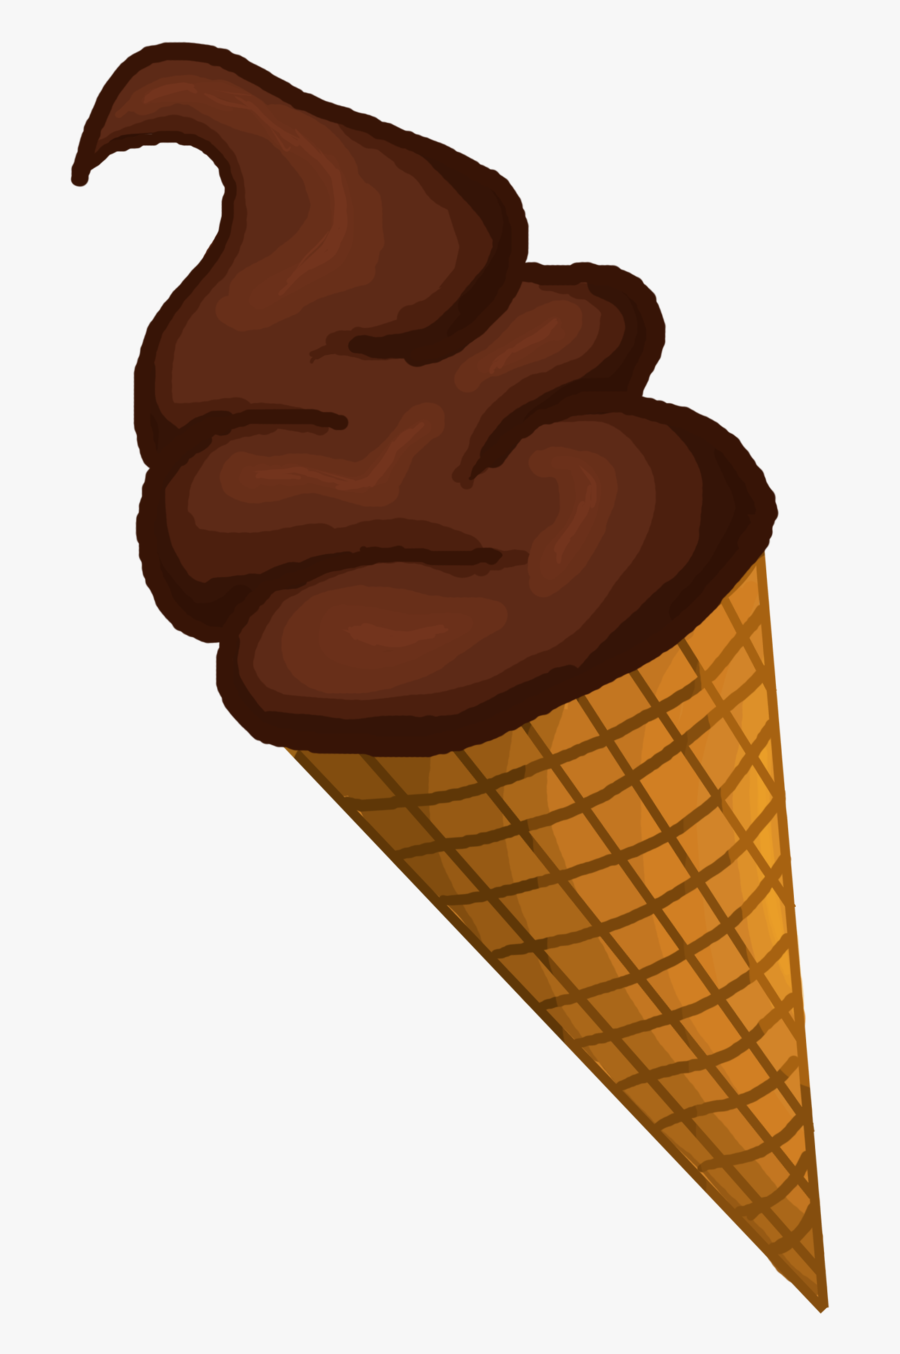 Https - //www - Freeiconspng - Com/uploads/ice Cream - Ice Cream Images With Transparent Background, Transparent Clipart